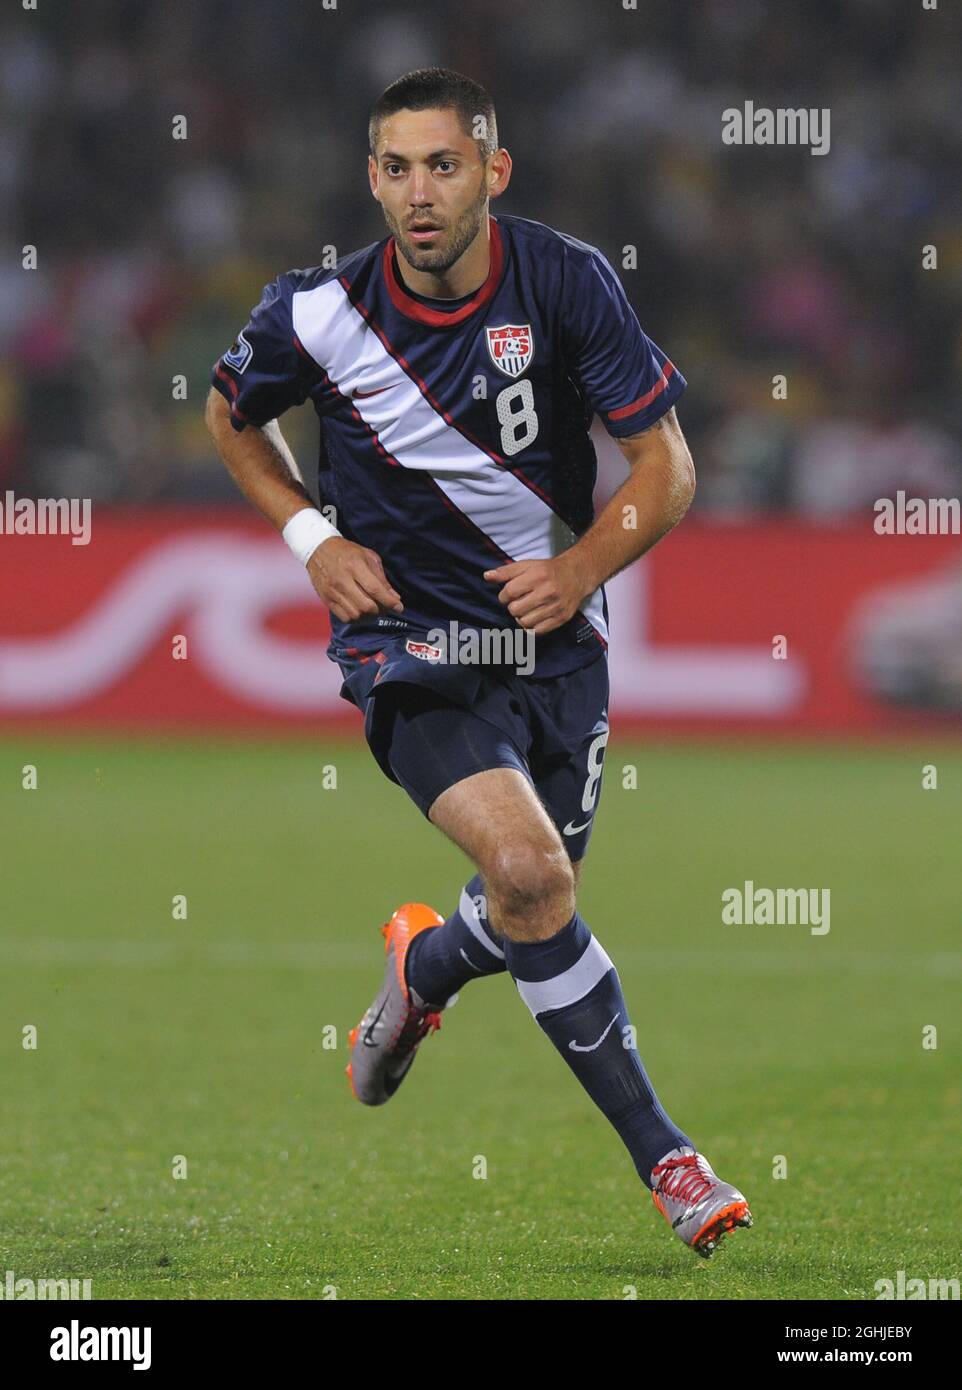 Clint Dempsey of USA in action during the FIFA World Cup 2010, Group C match between England v USA at Royal Bafokeng Stadium, Rustenburg, South Africa. Stock Photo